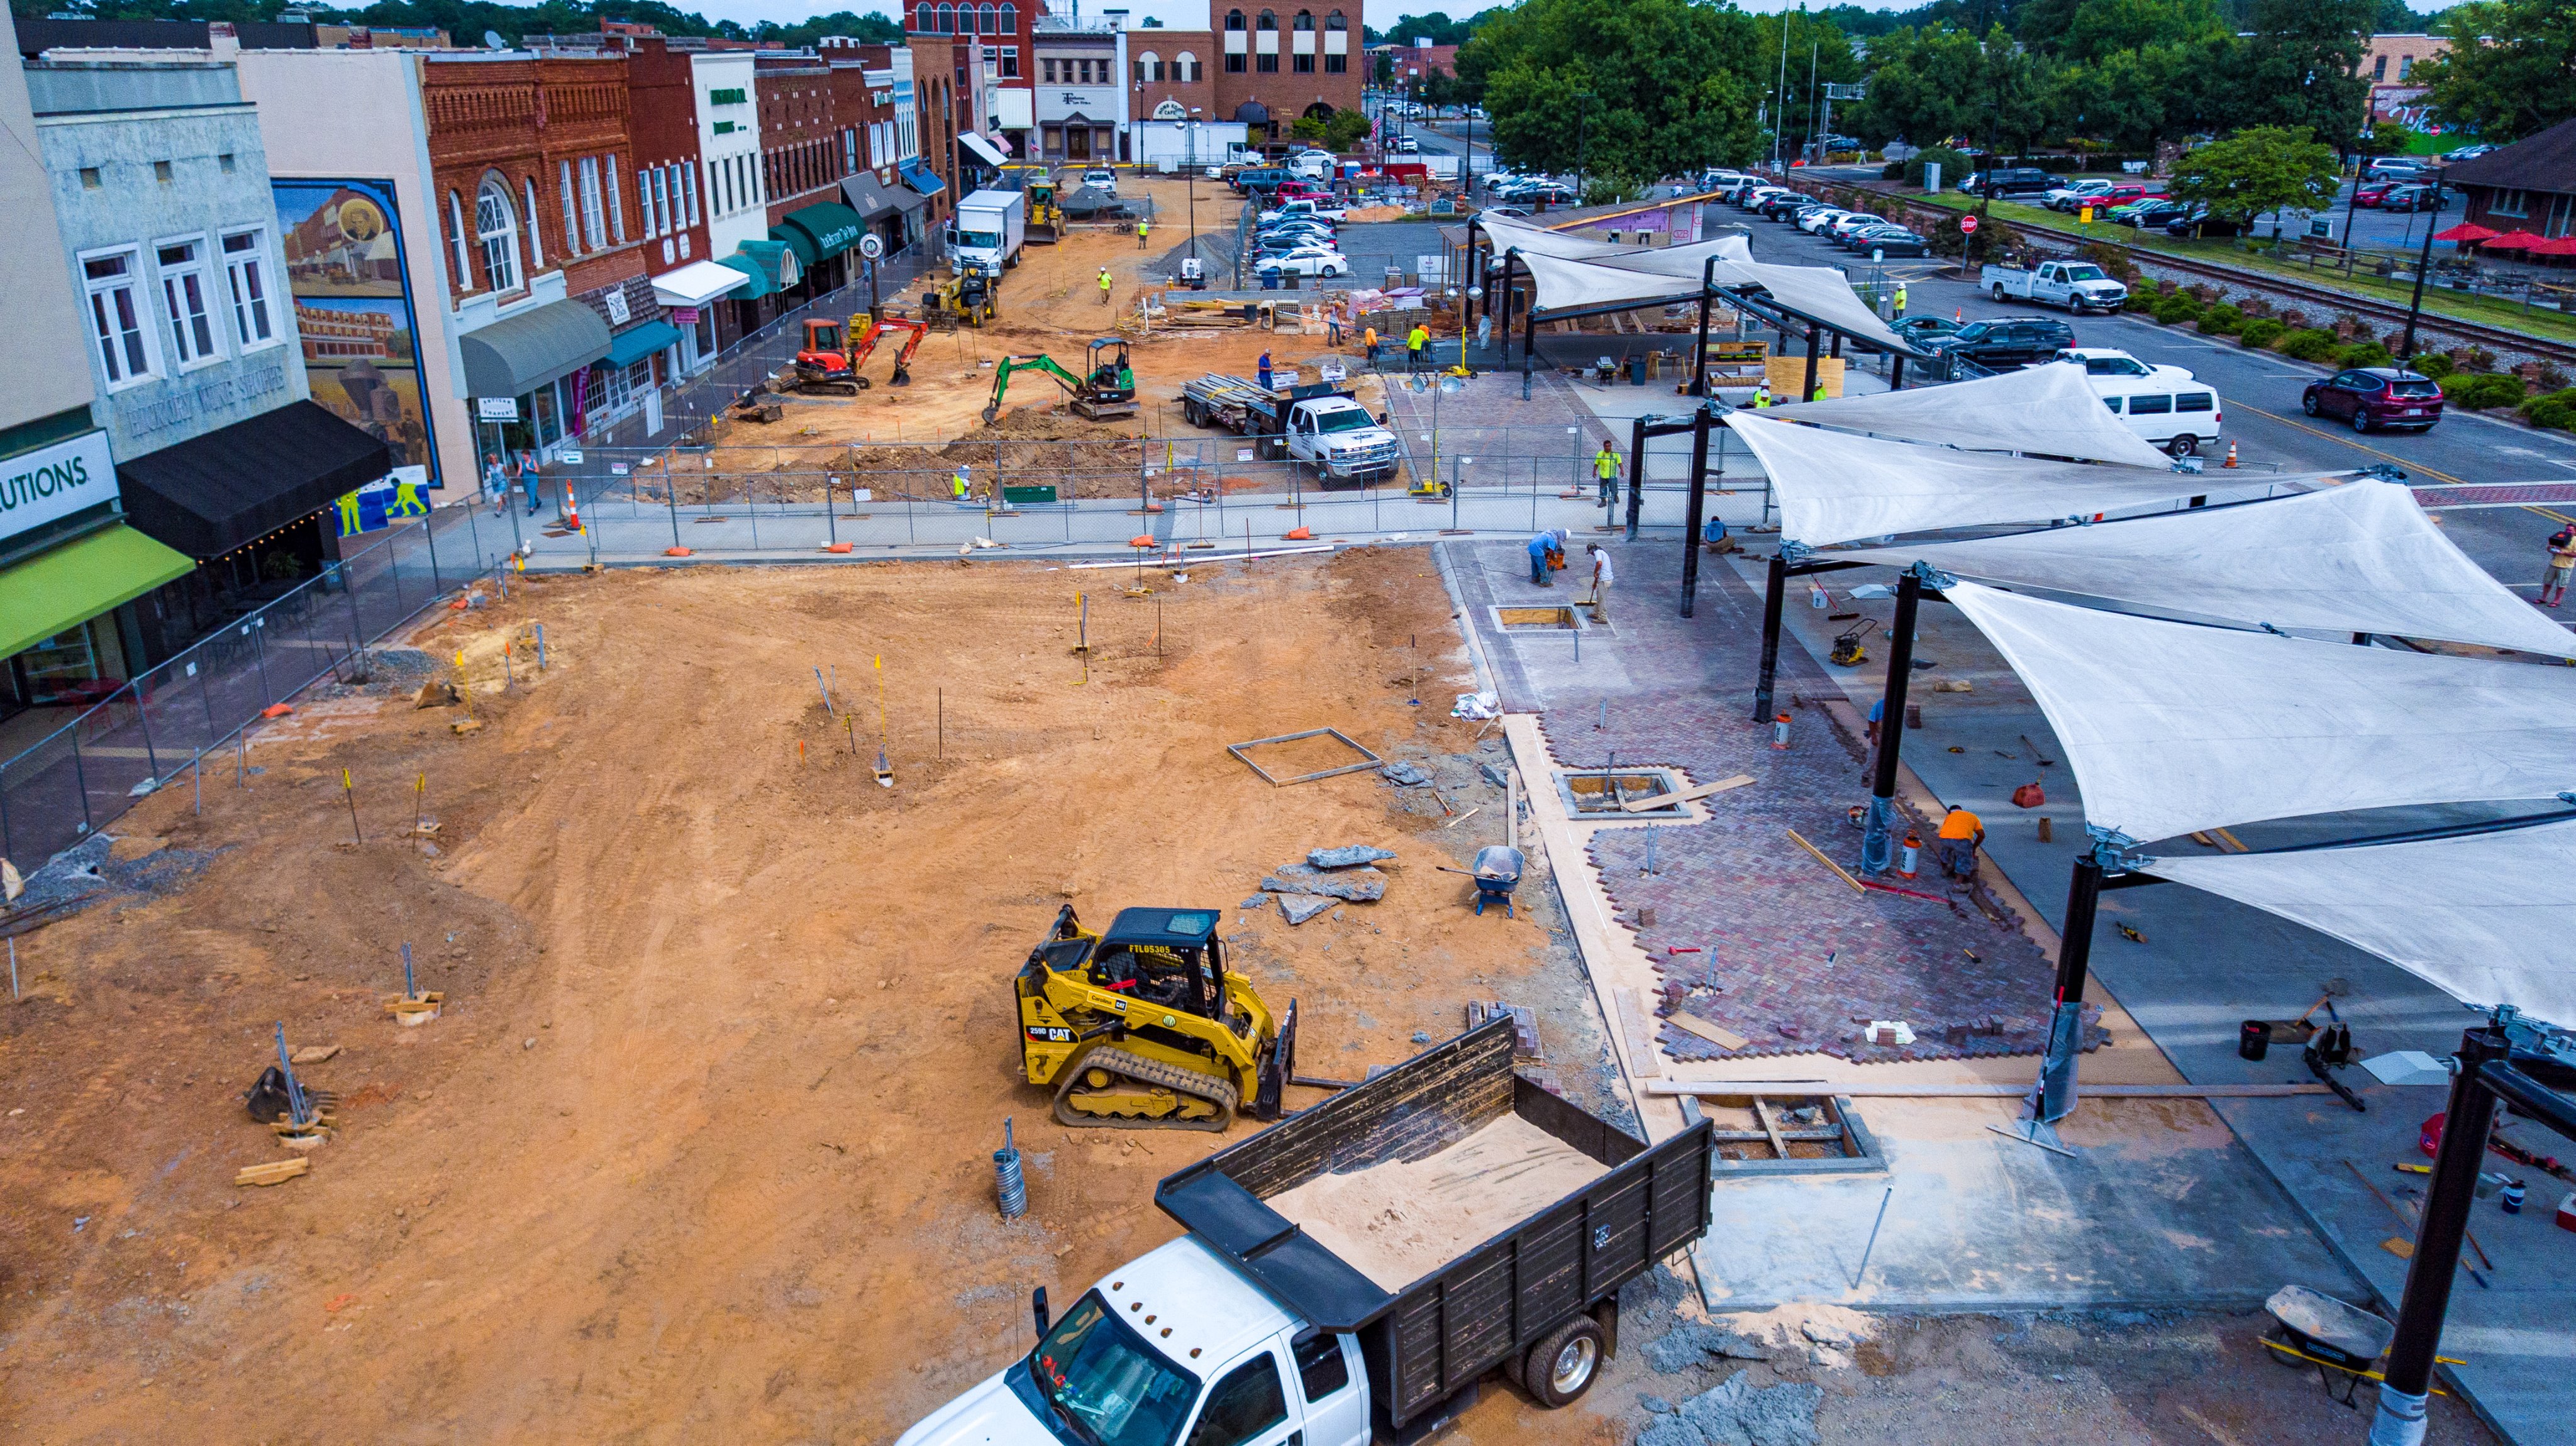 The remake of the Union Square area of the City Walk downtown corridor under construction is designed to maintain the historic feel while emphasizing storefront visibility, a defined center path connector across the lawn, improved lighting and outdoor seating.